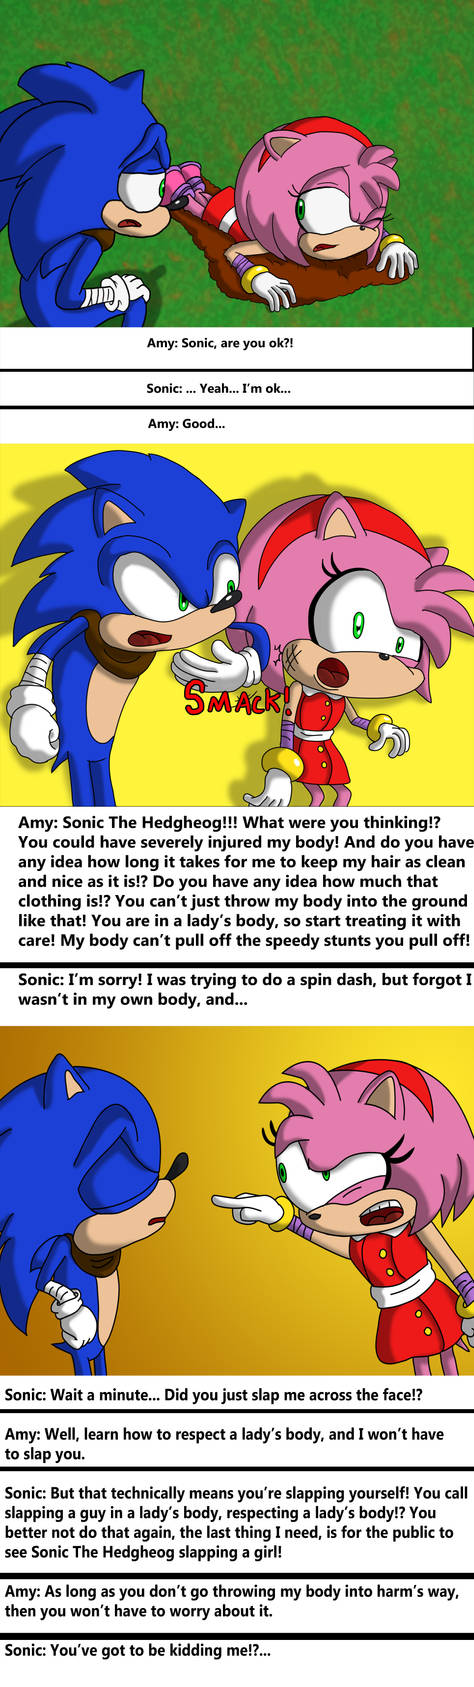 Sonic Boom Sheet Music Page 1 by ADE501 on DeviantArt